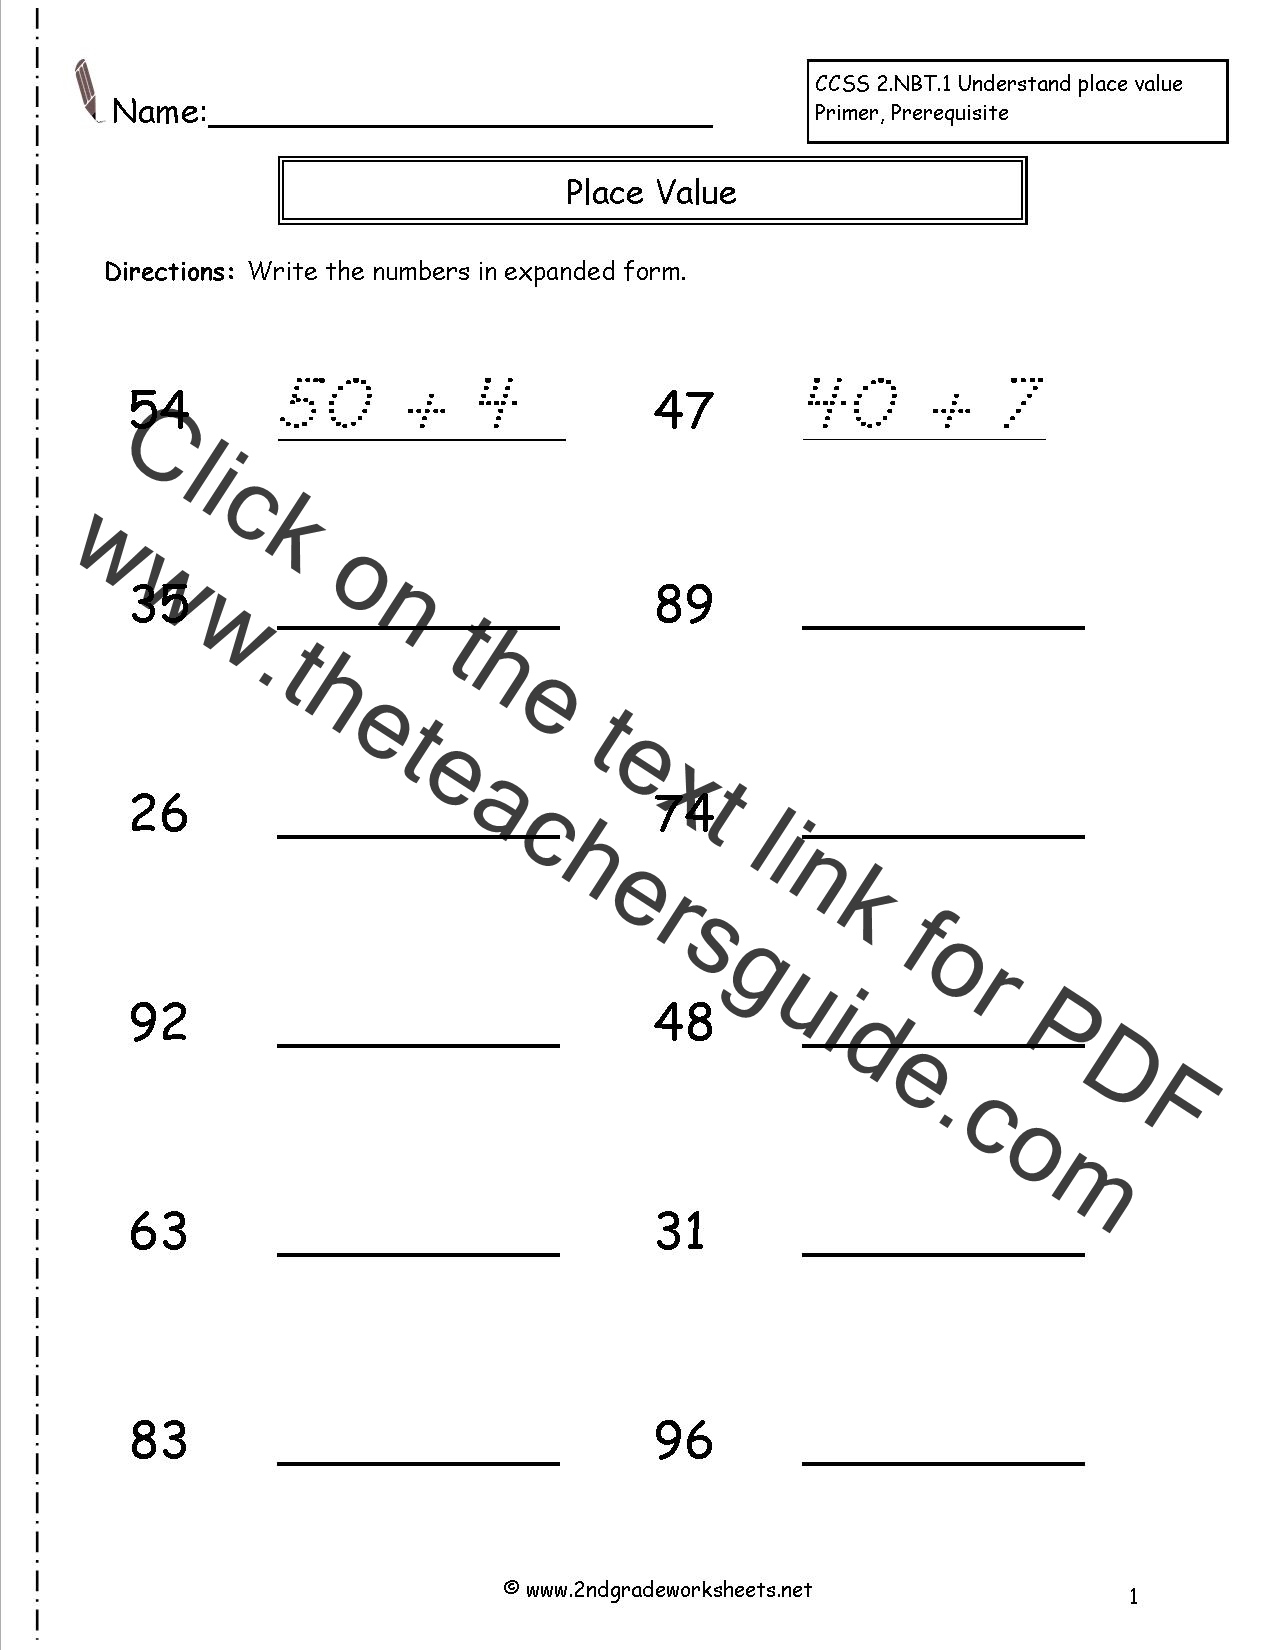 common-core-math-grade-3-worksheets-db-excel